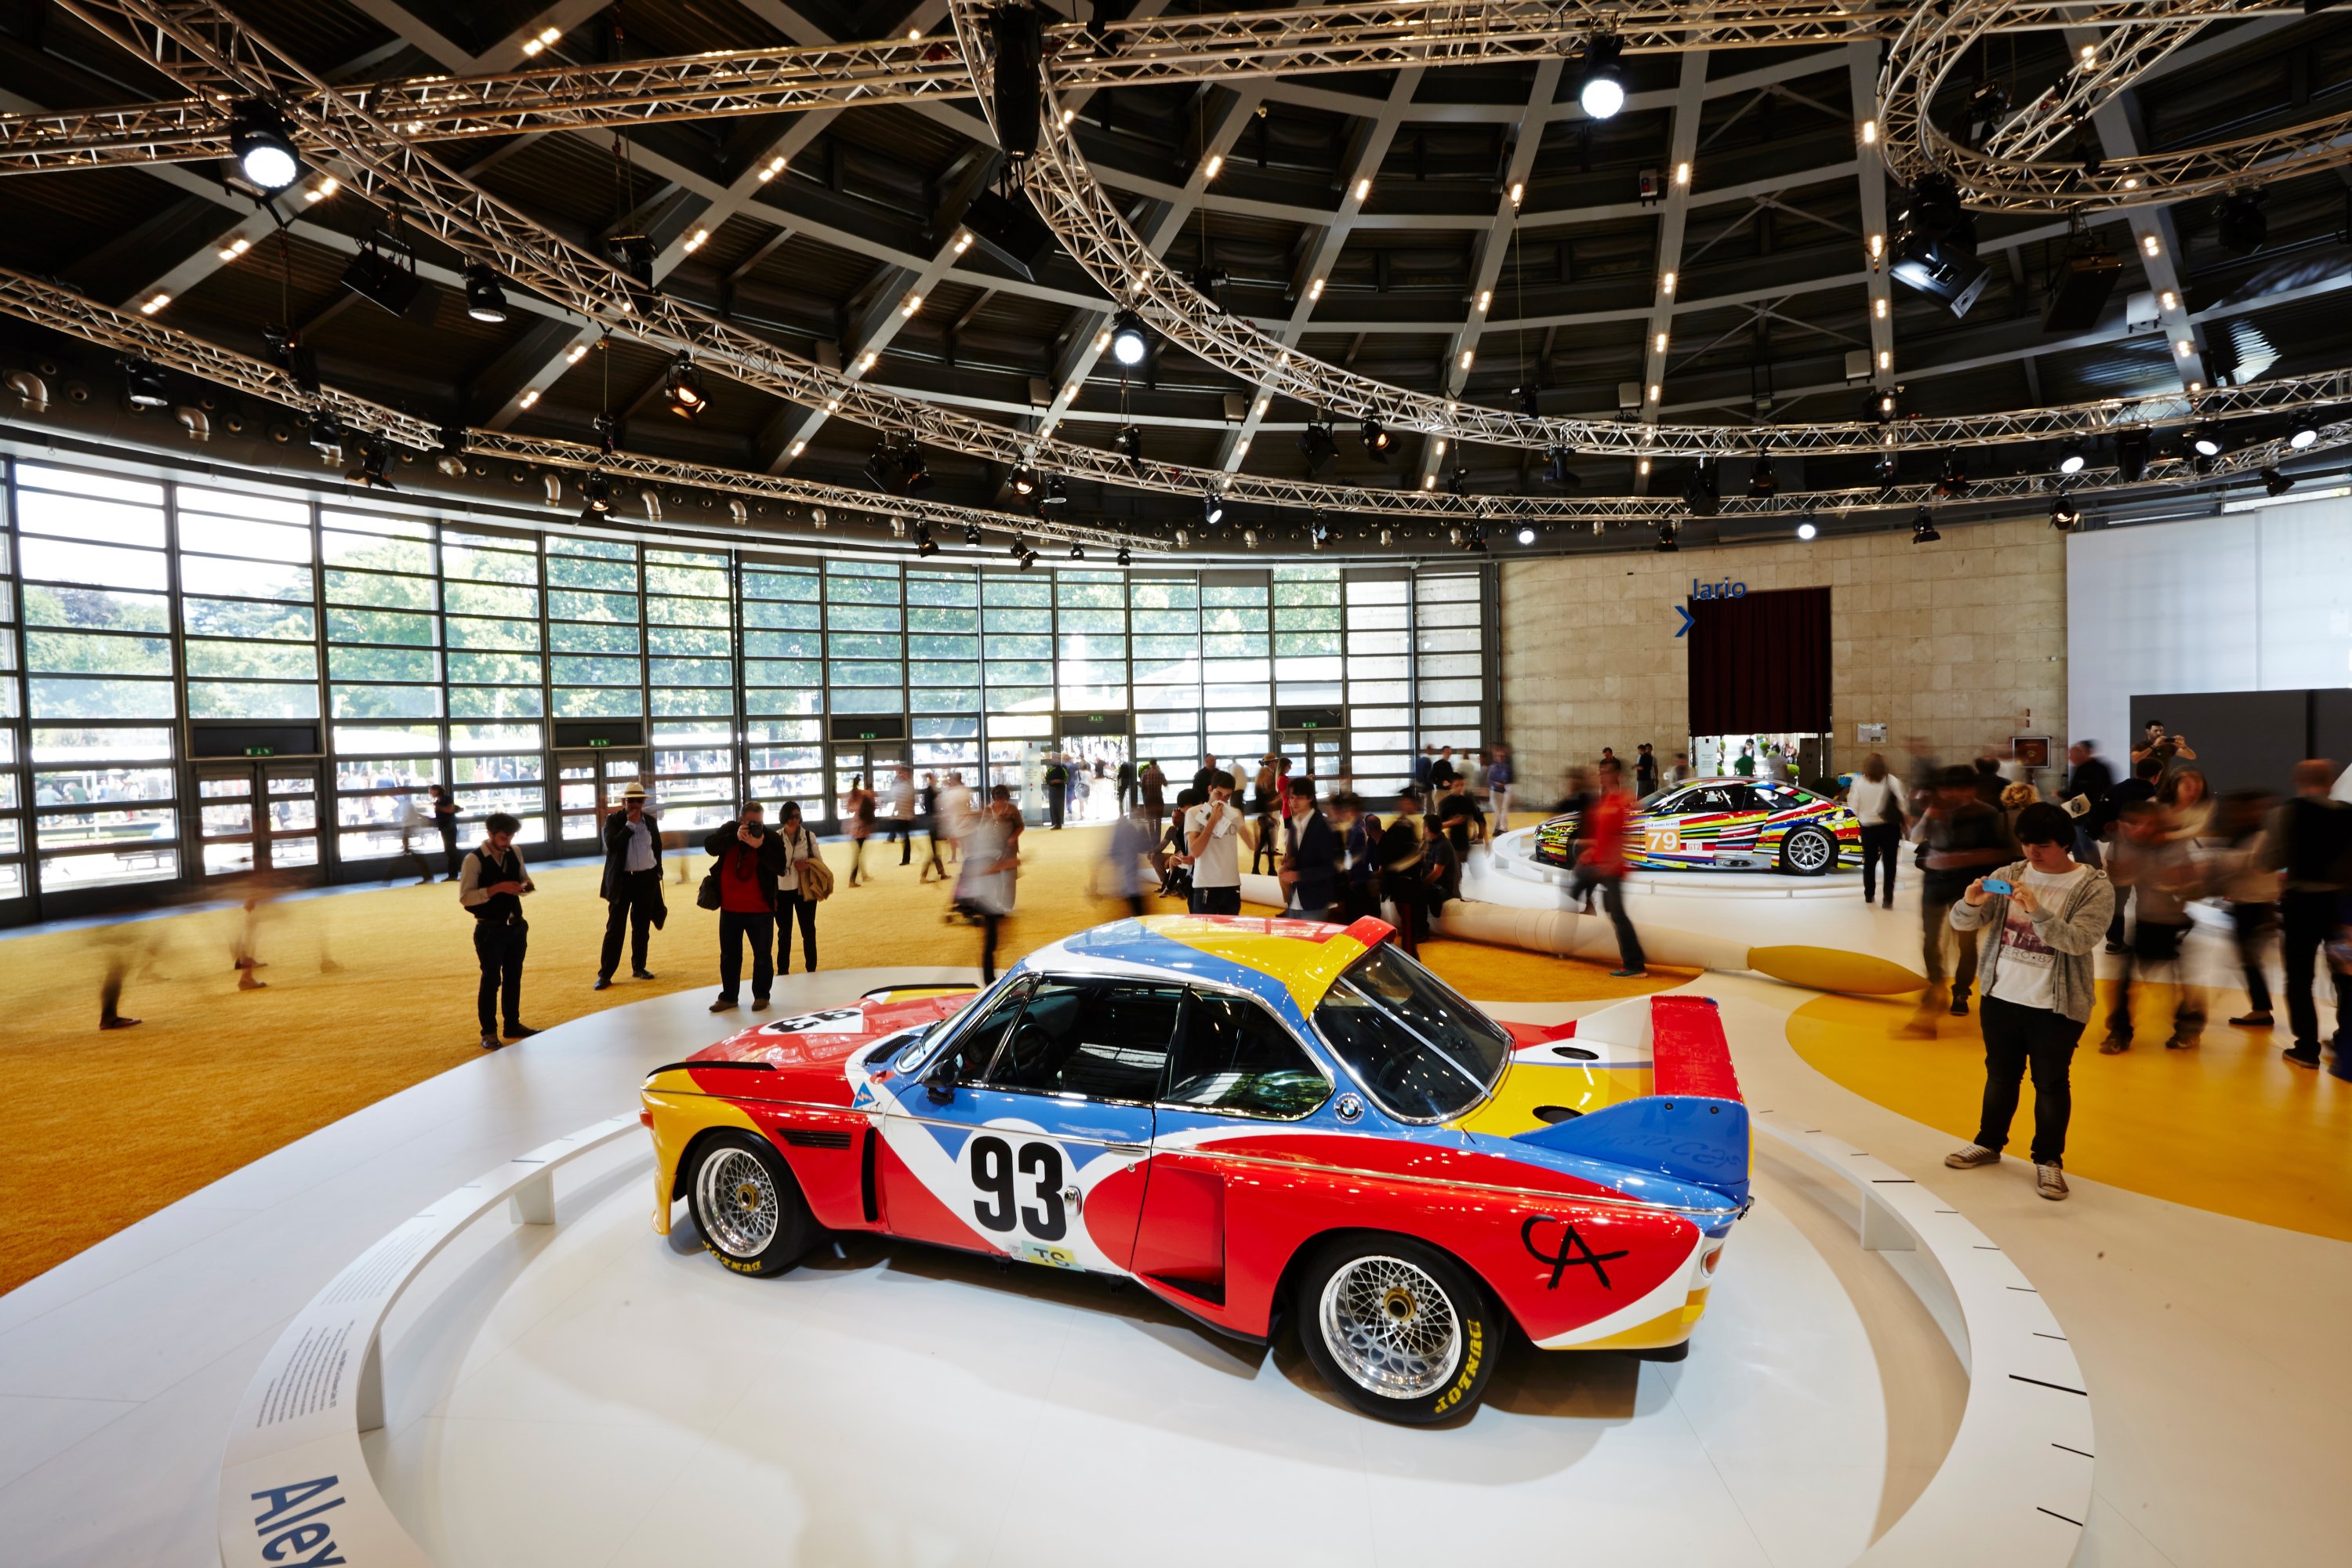 The 3.0 CSL designed by Alexander Calder in 1975 was the first in a series of BMW Art Cars that continues to this day. (DPA Photo) 